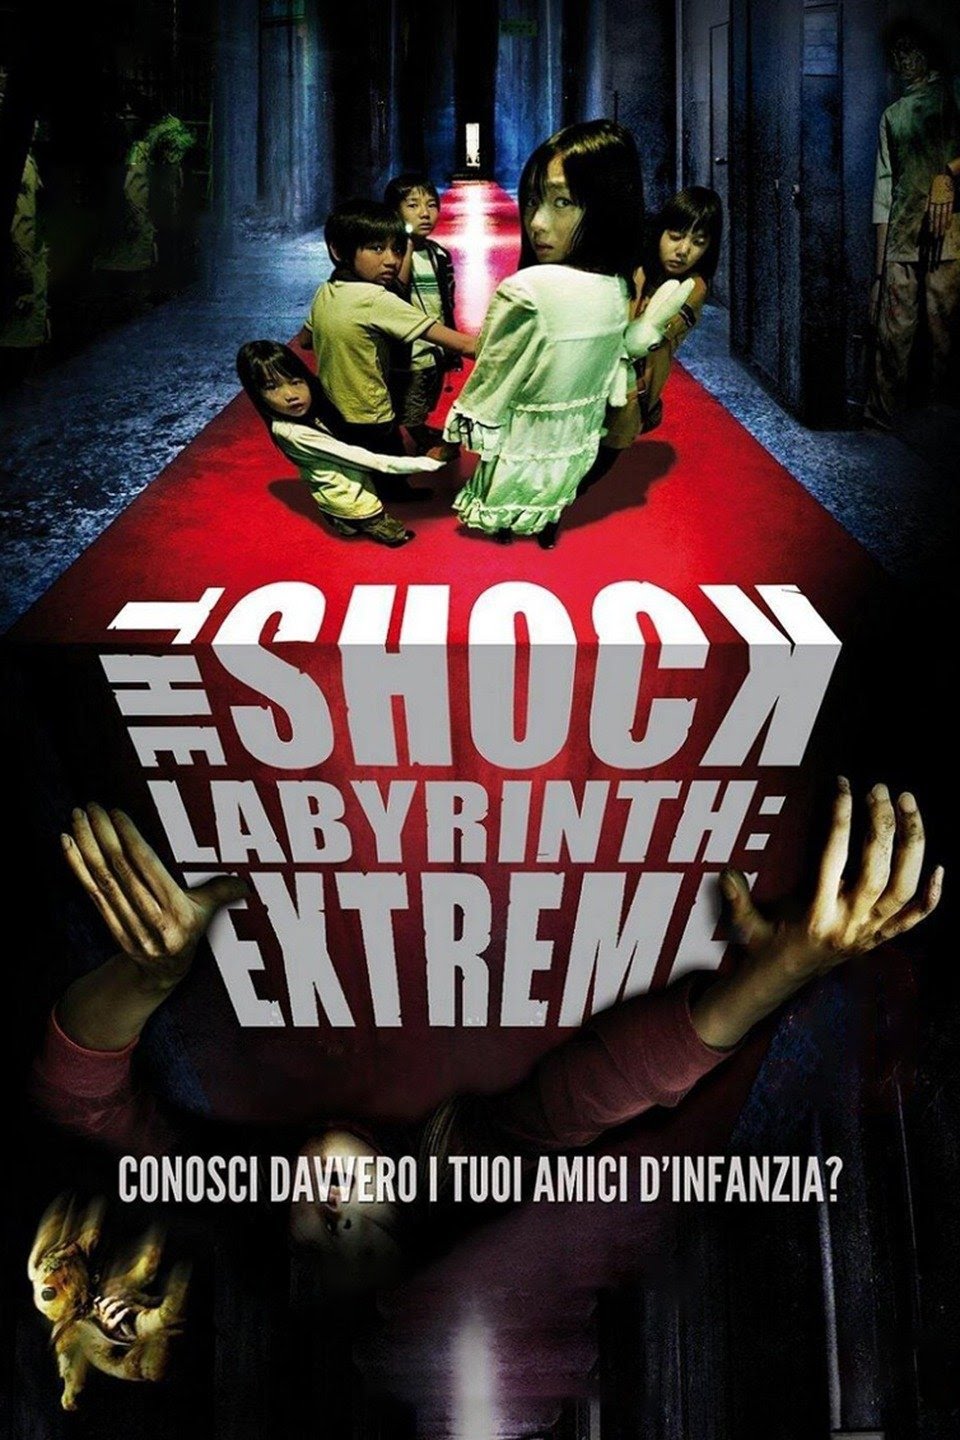 The Shock Labyrinth: Extreme [HD/3D] (2011)